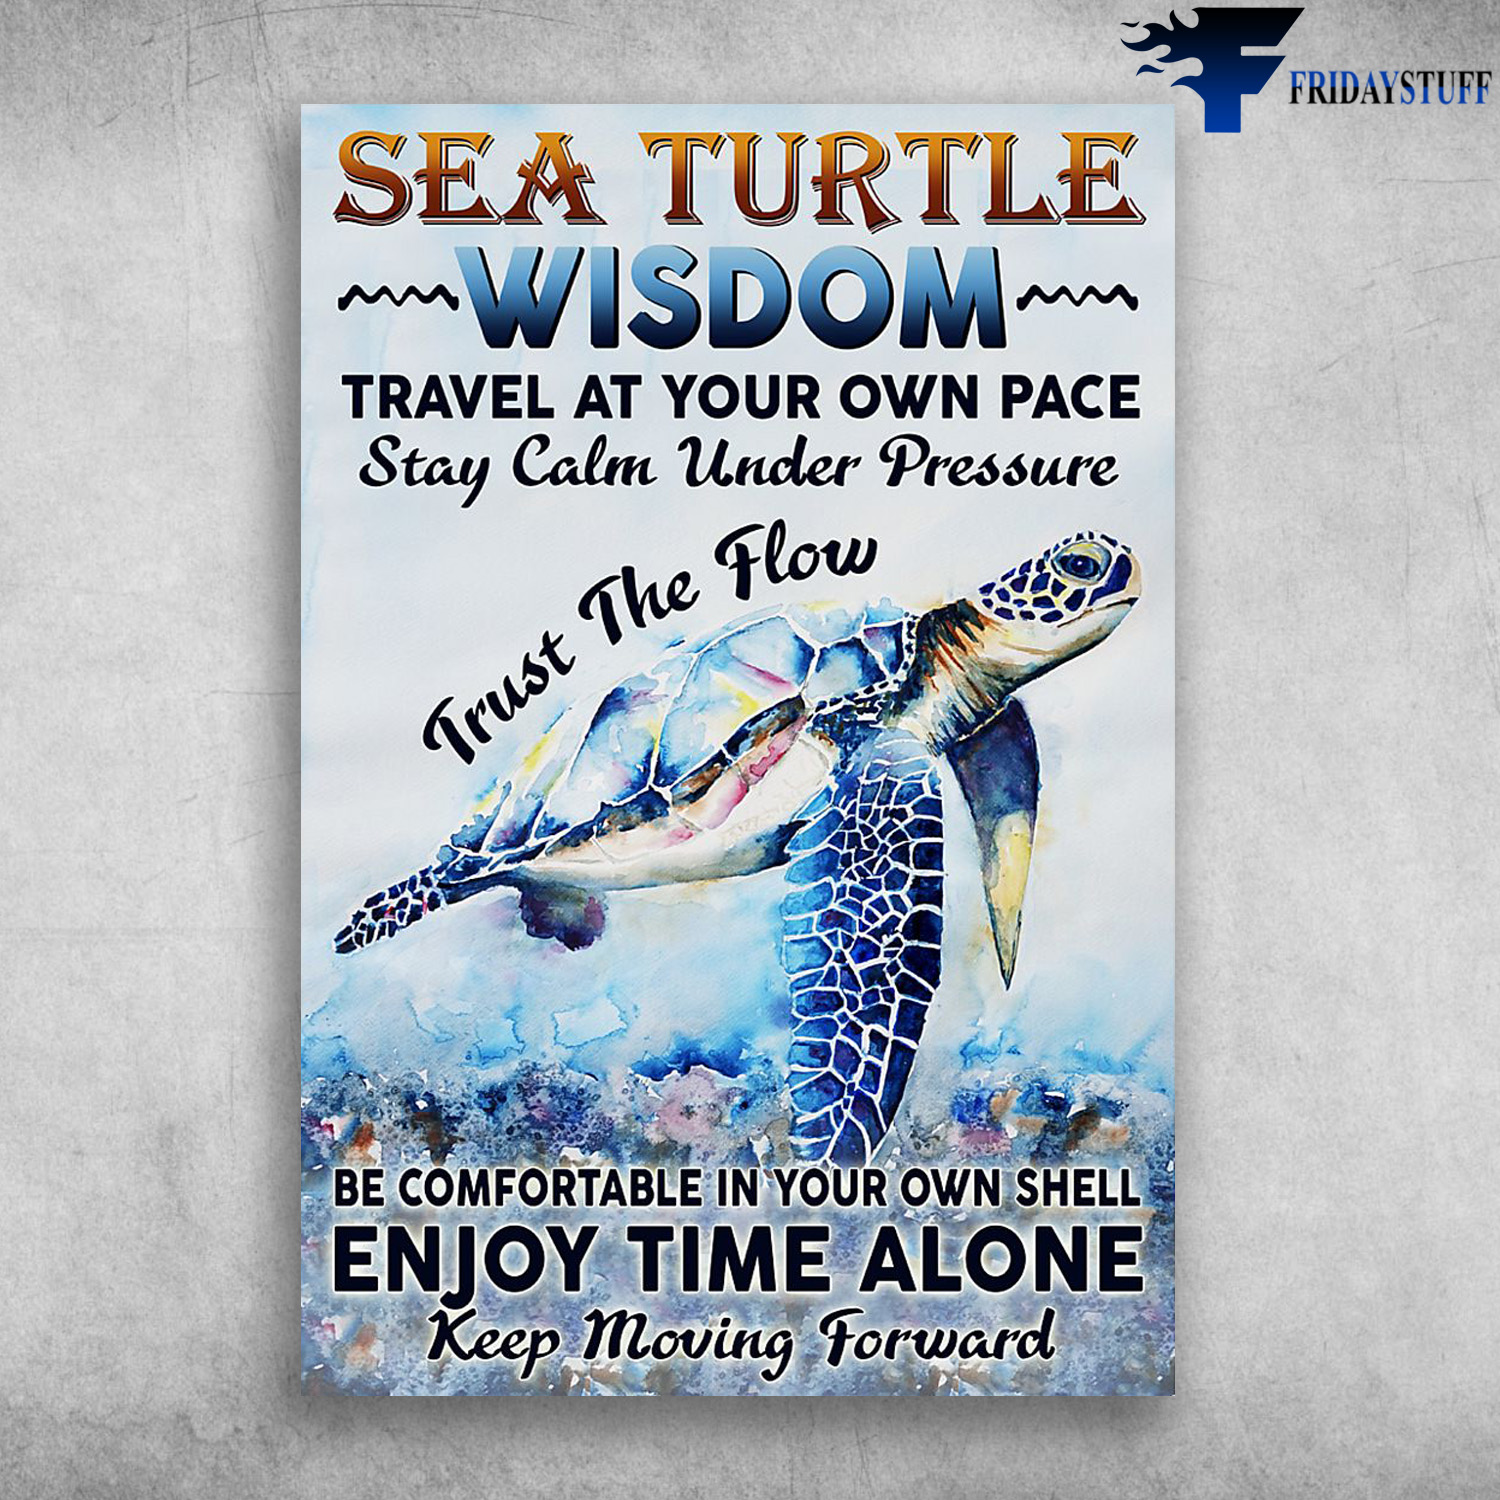 Turtle On The Sea - Sea Turtle Wisdom, Travel At Your Own Pace, Stay Calm Inder Pressure, Trust The Flow, Be Comefortable In Your Own Shell, Enjoy Time Alone, Keep Moving Forward